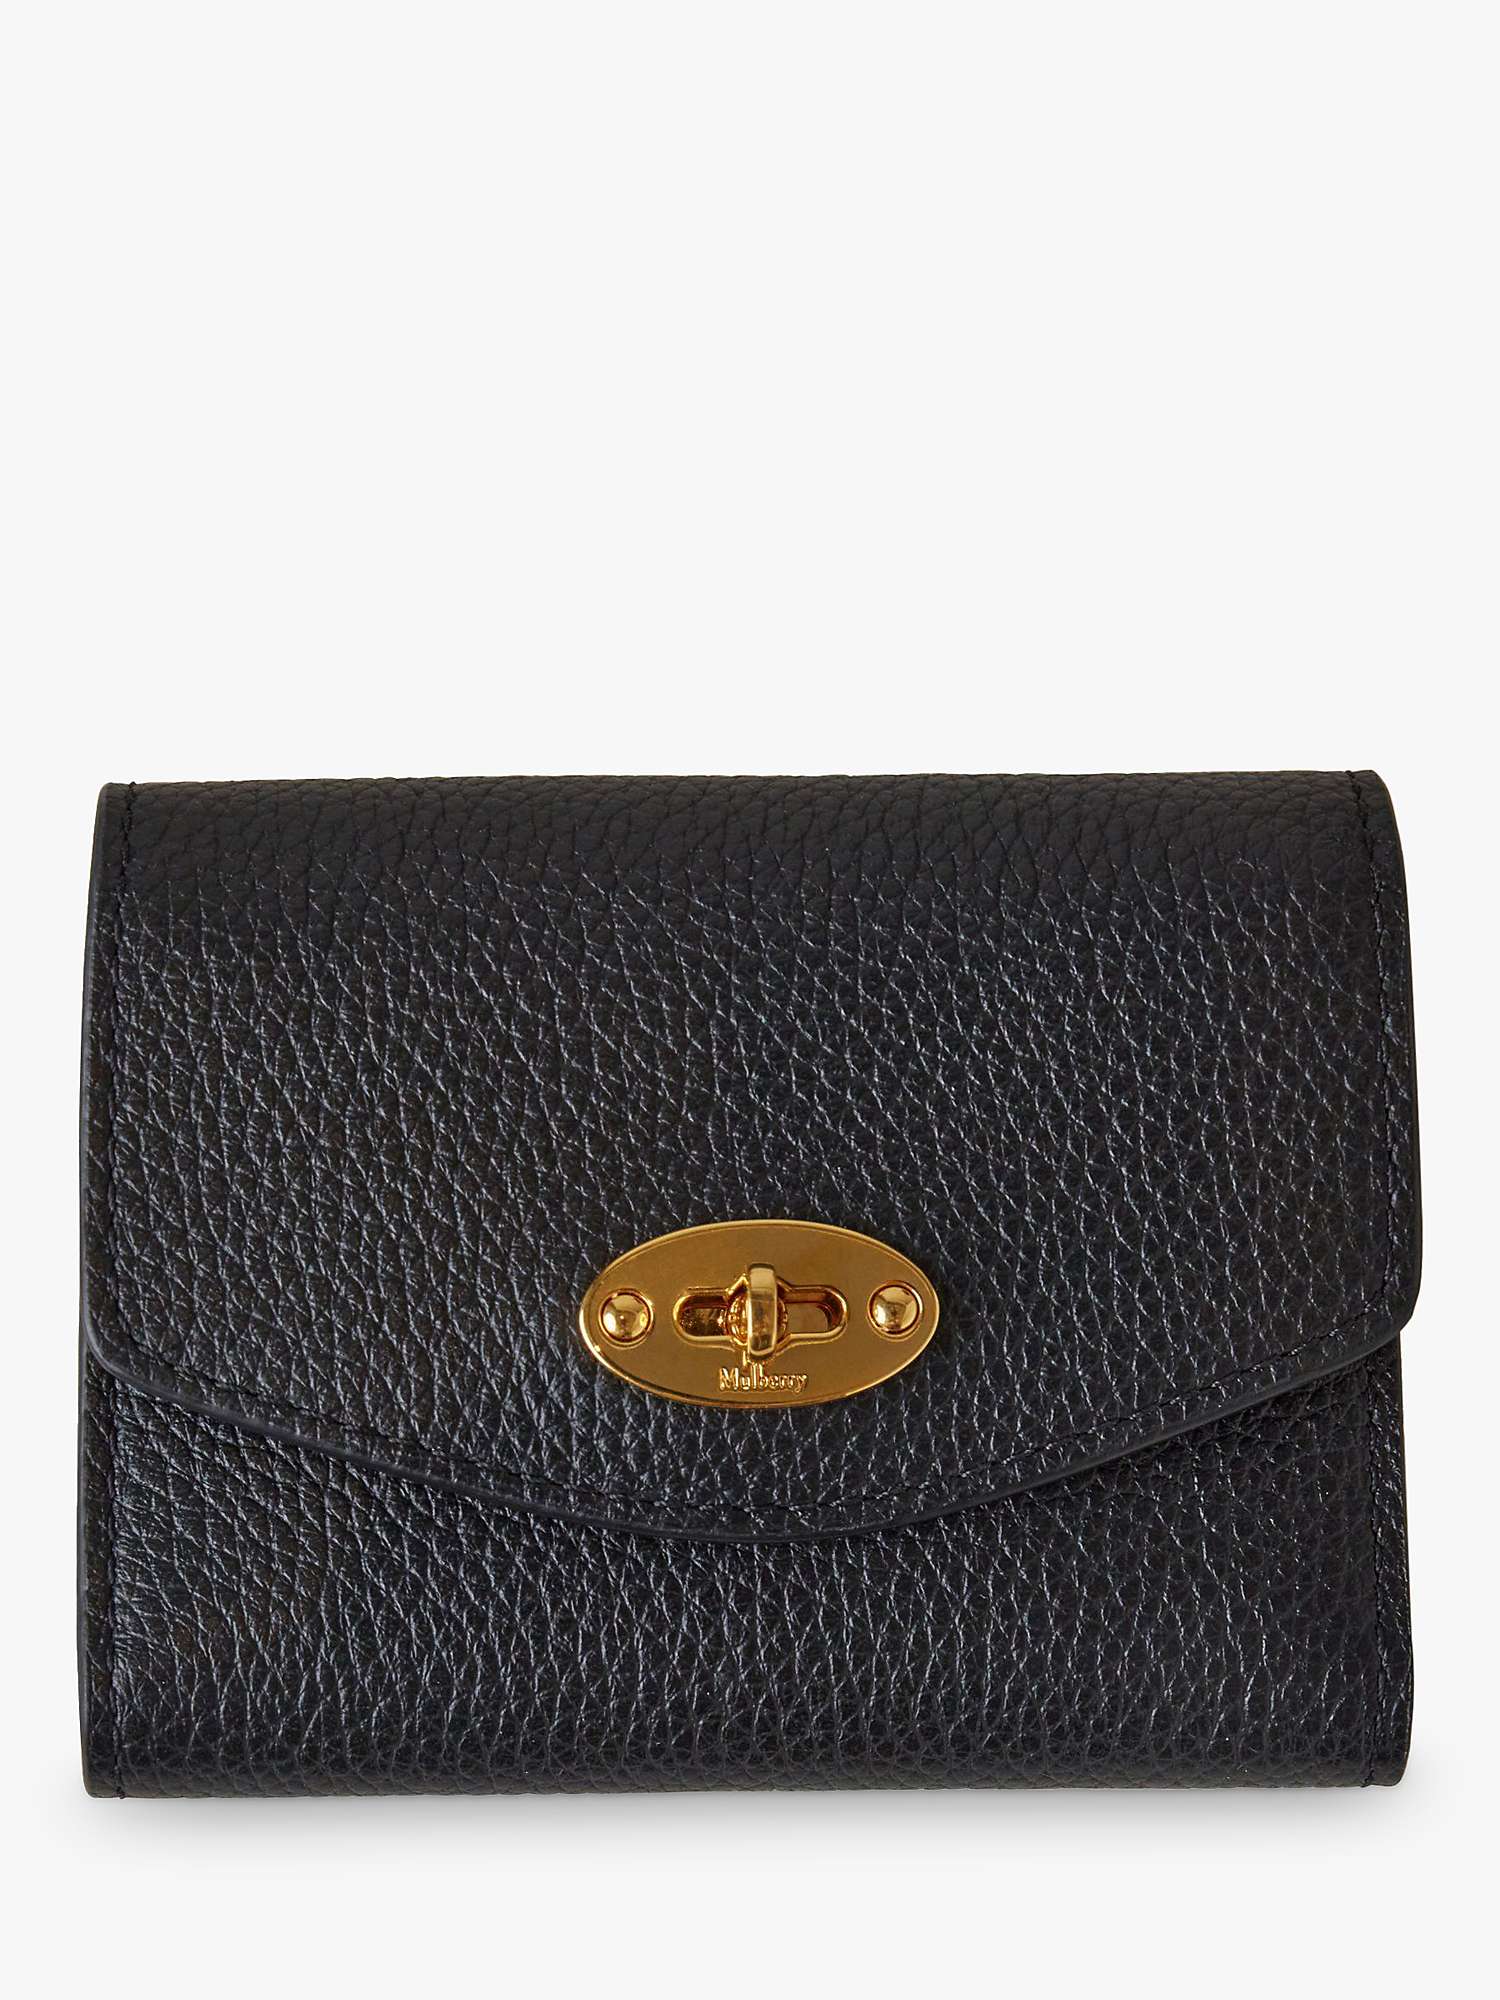 Buy Mulberry Darley Small Classic Grain Leather Concertina Wallet Online at johnlewis.com